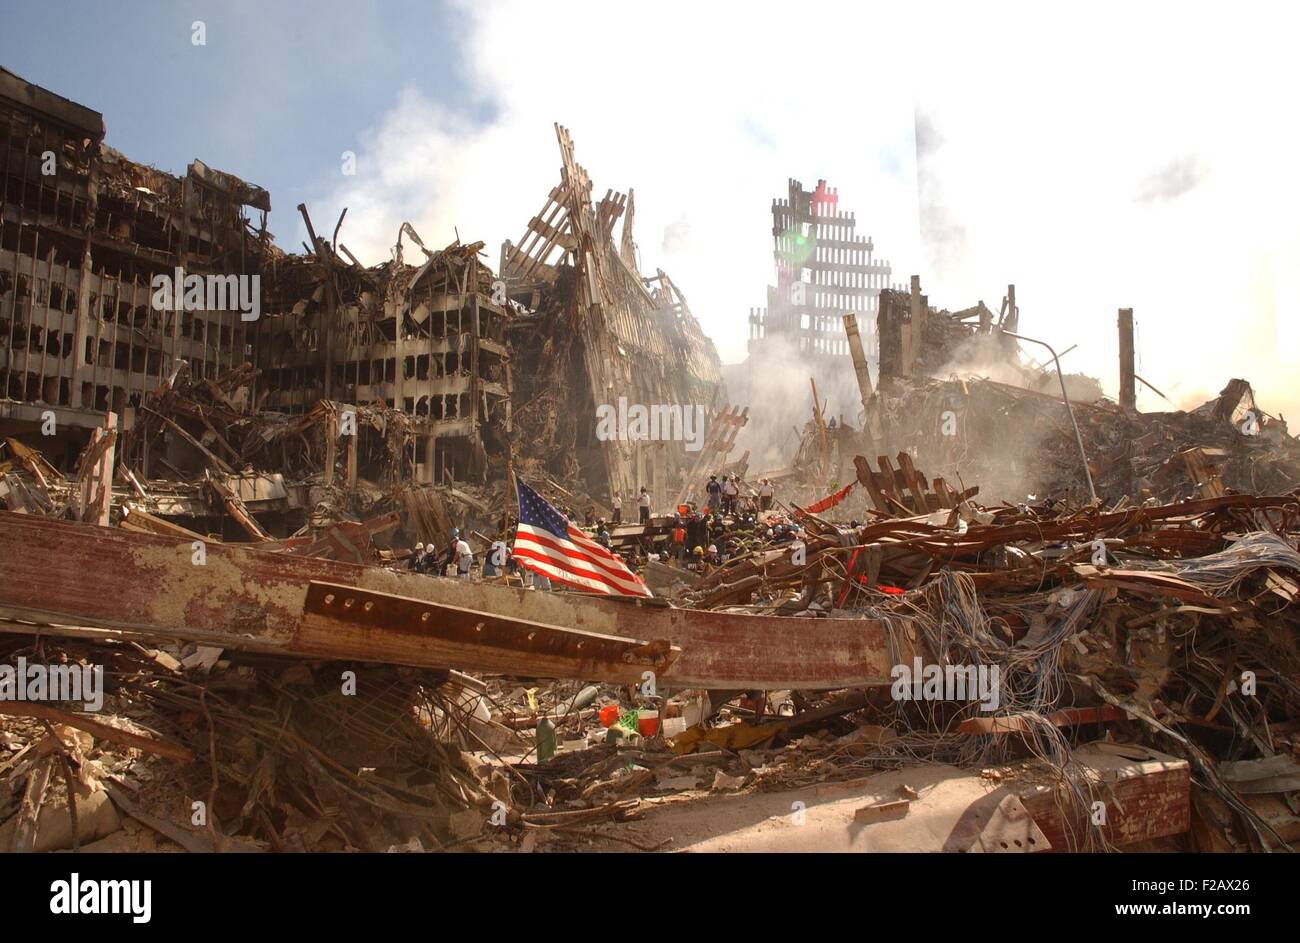 Smoke rises from the World Trade Center's collapsed North Tower. On the left are the remains of a lower structure, WTC 6. A large flag is secured to a beam in the foreground. New York City, Sept. 16, 2001. (BSLOC 2015 2 84) Stock Photo